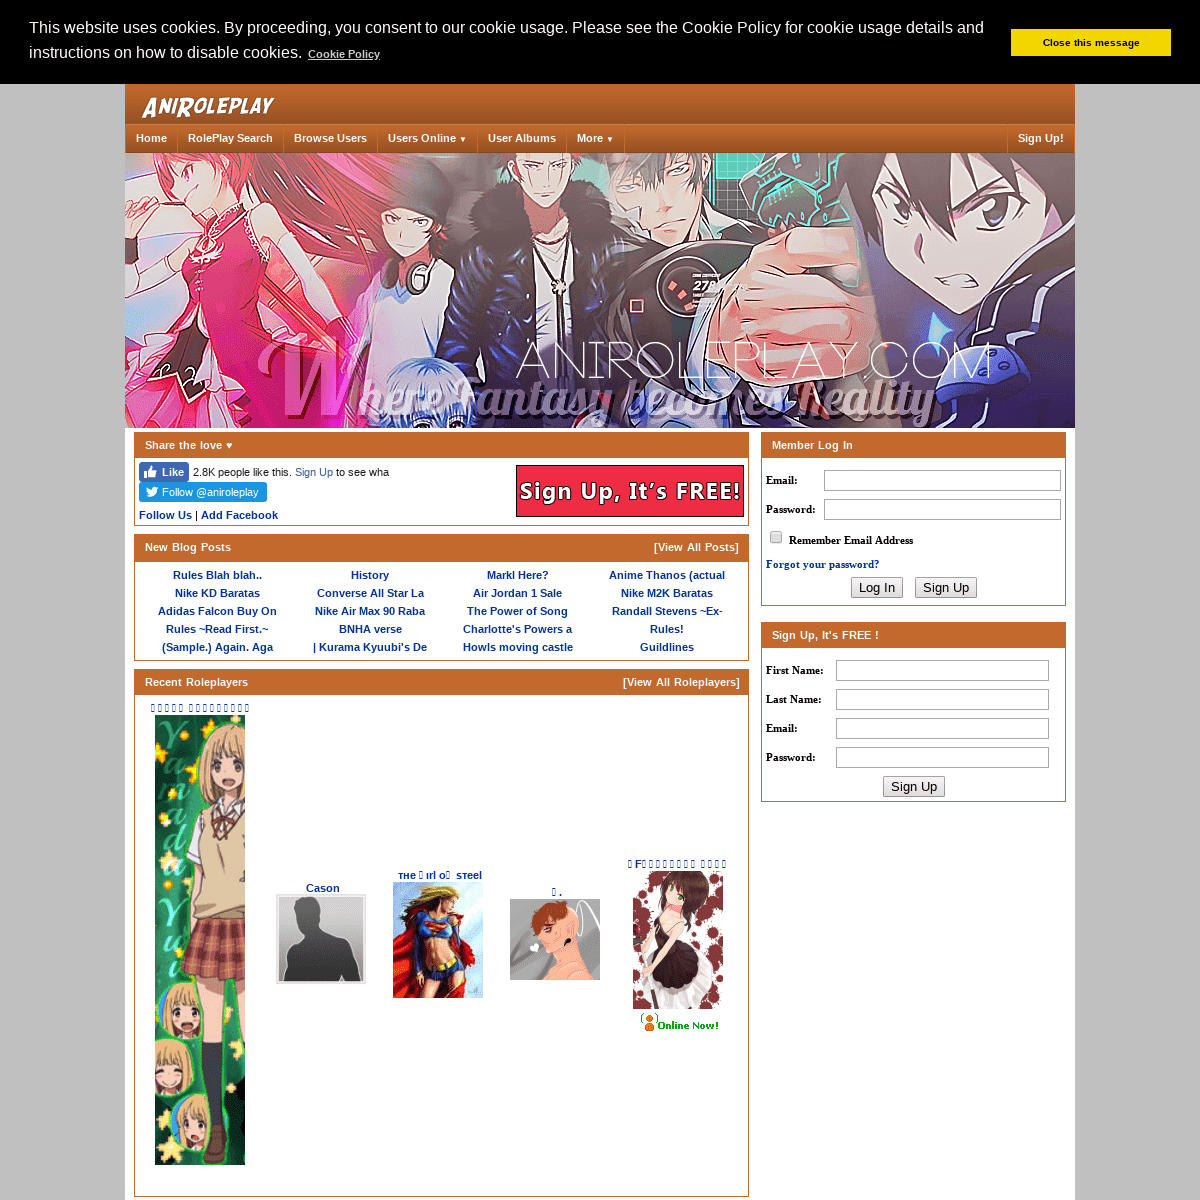 AniRoleplay.com | A Social Network for Anime Roleplayers